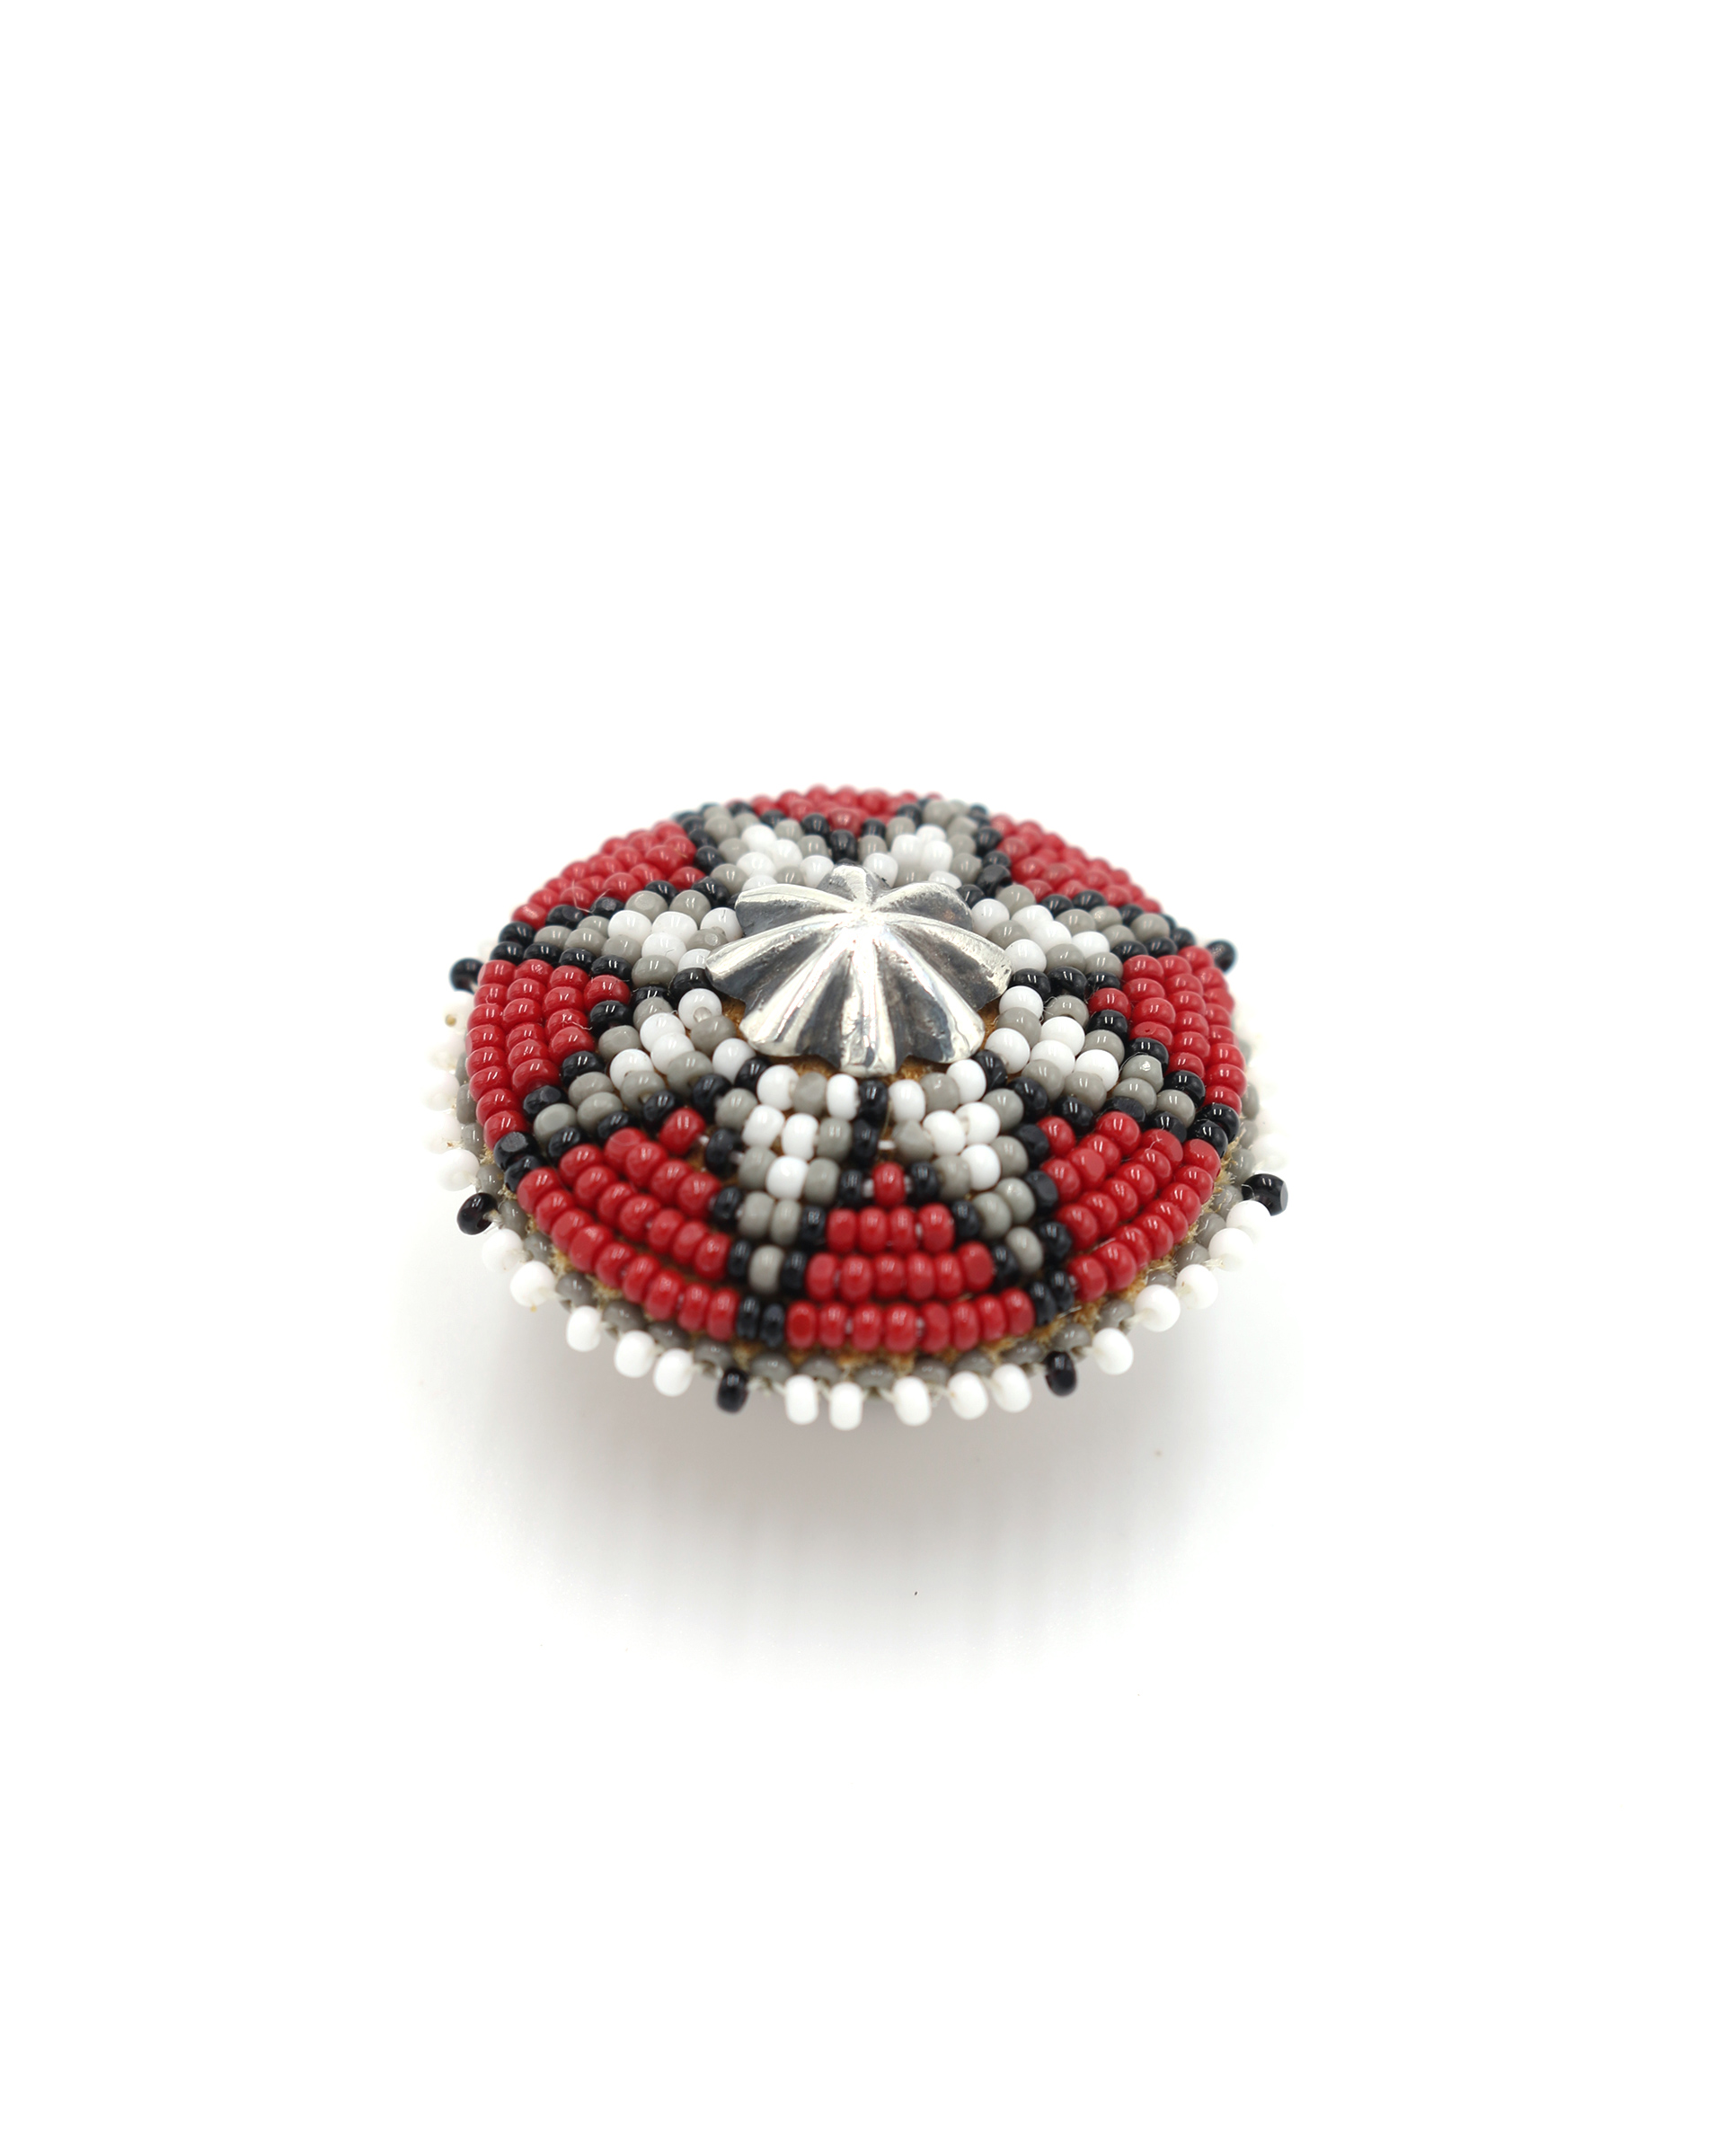 RED-SBC-1 - MORNING STAR / SILVER & BEAD CONCHO